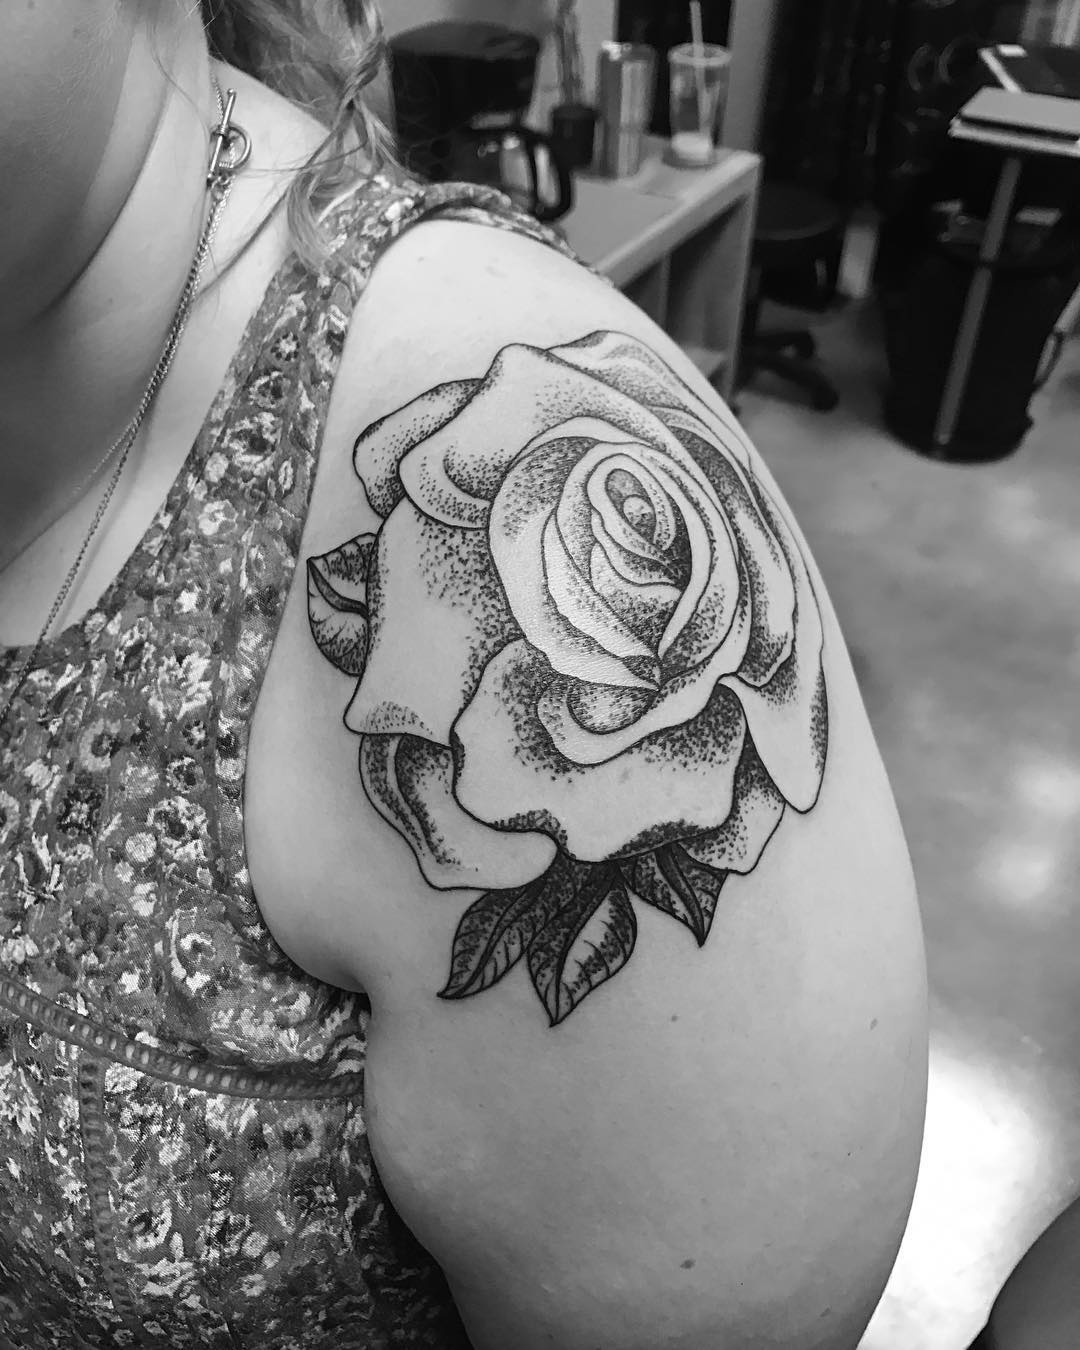 Rose with speckles in a tattoo